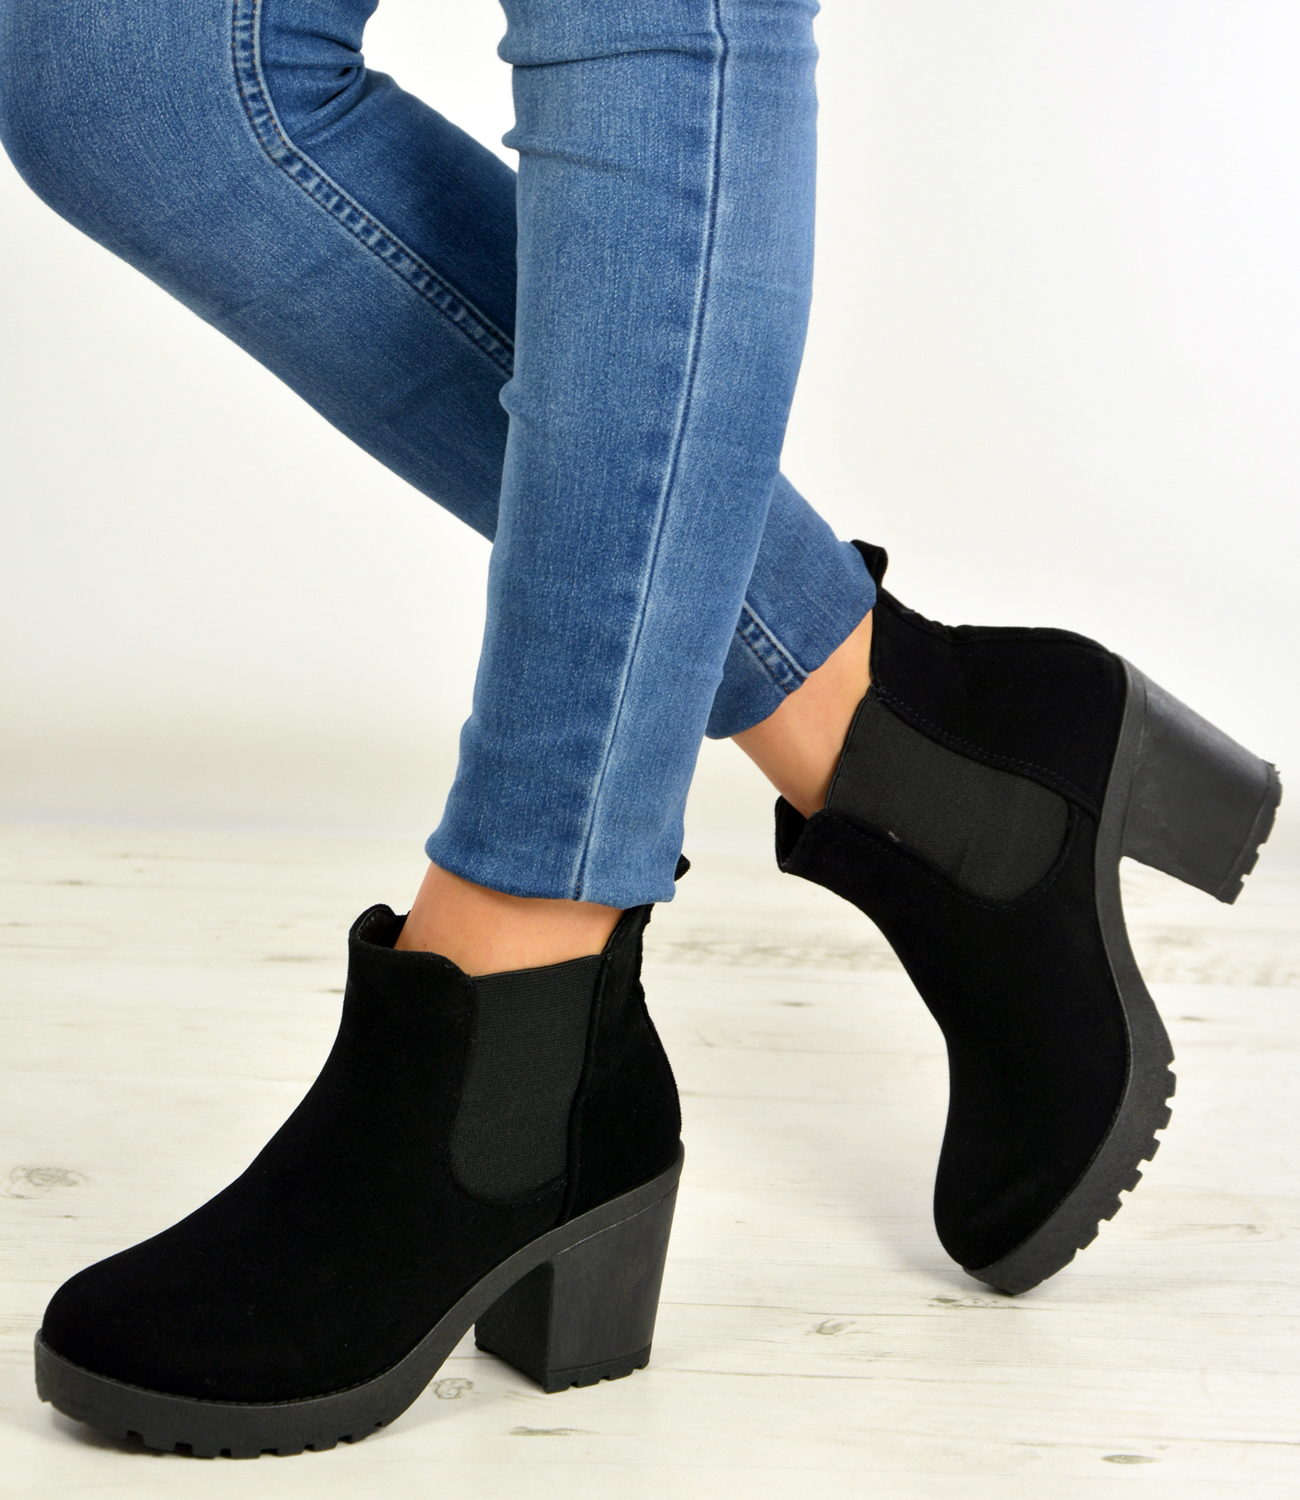 New Womens Ankle Chelsea Boots Chunky Block Heels Platform Shoes Size ...